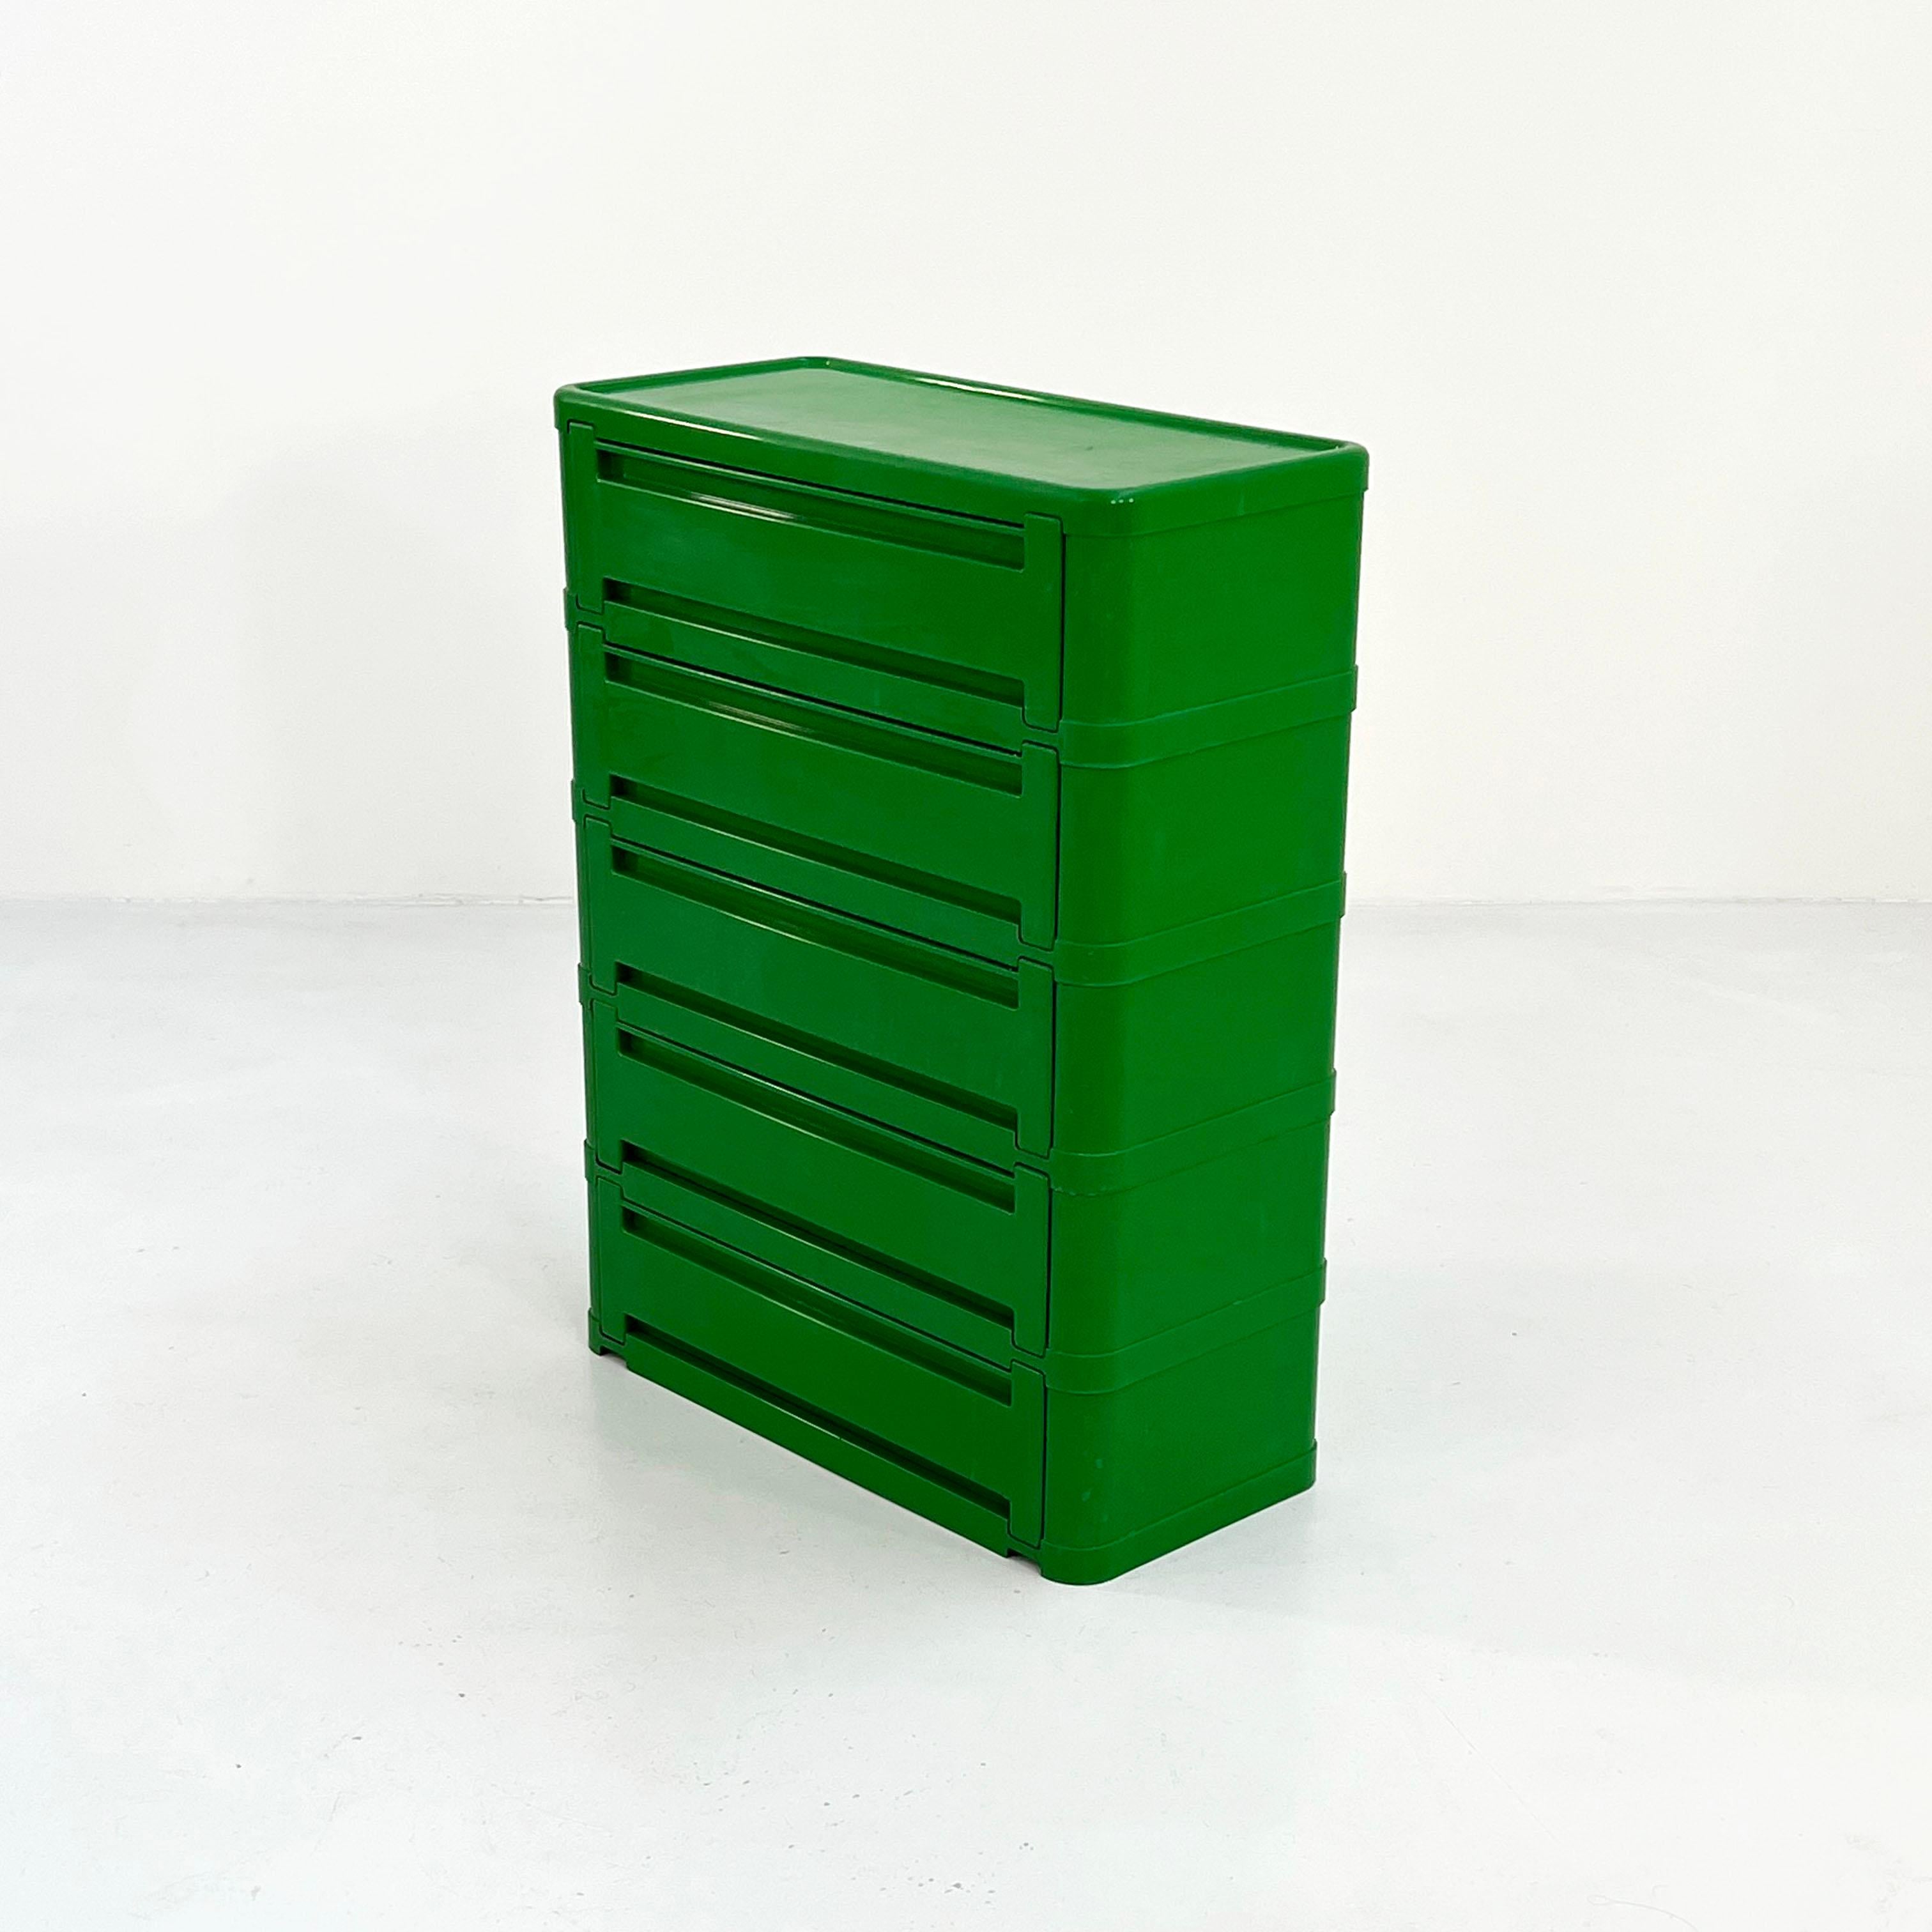 Designer - Olaf Von Bohr
Producer - Kartell
Model - Model “4964”
Design Period - Seventies
Measurements - Width 72 cm x Depth 34 cm x Height 95 cm
Materials - Plastic
Color - Green
Comments - Light wear consistent with age and use. Some